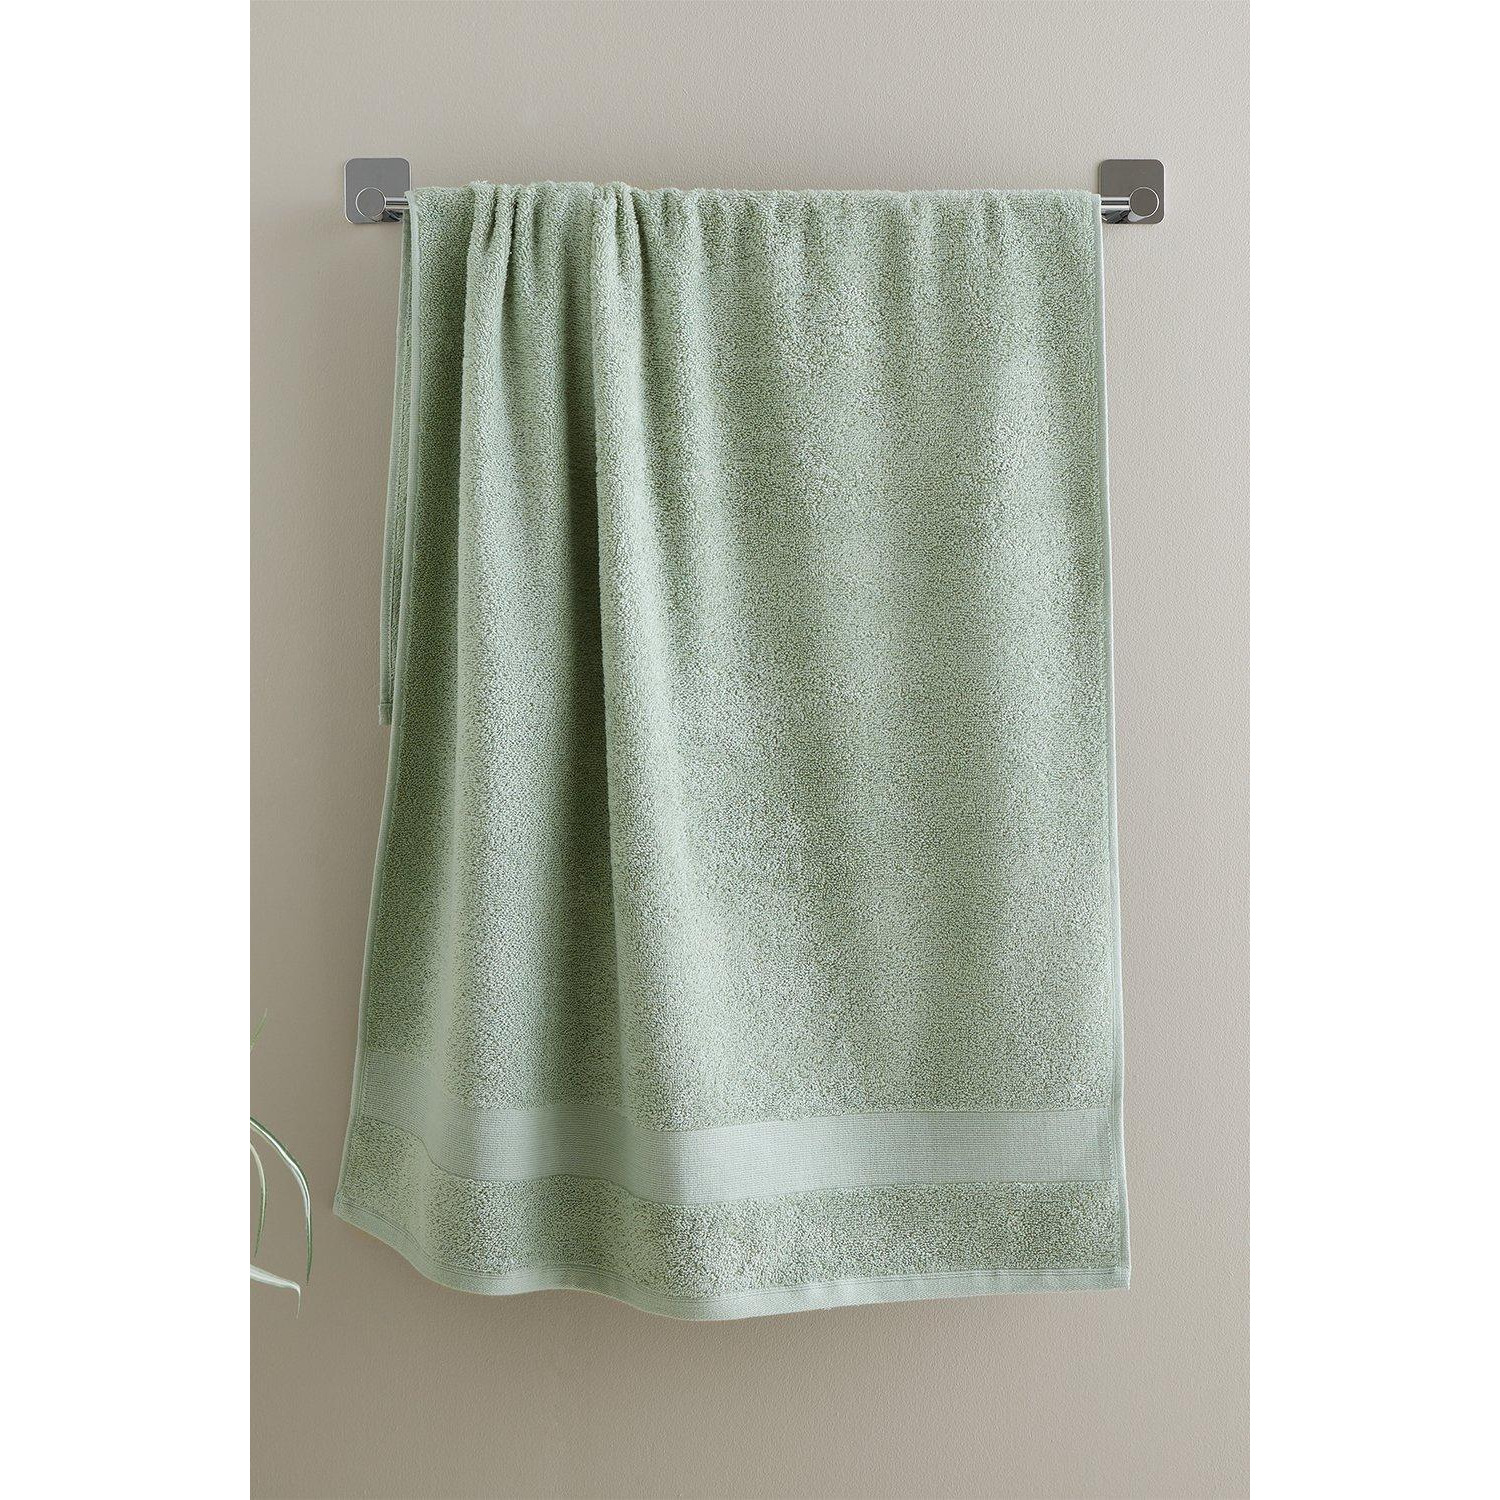 'Anti Bacterial' Cotton Towels - image 1